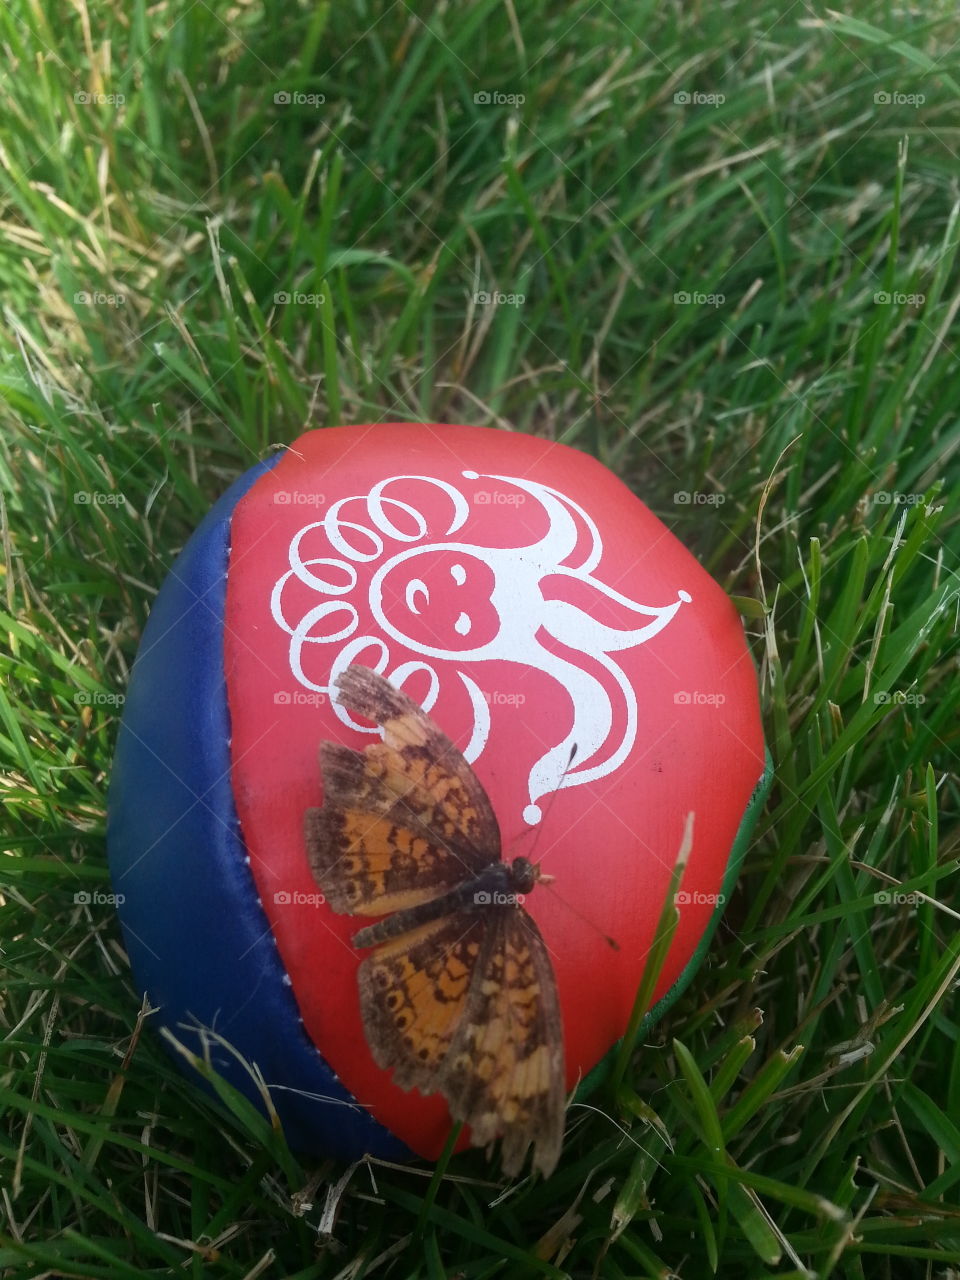 butterfly on ball. A butterfly landed on a juggling ball